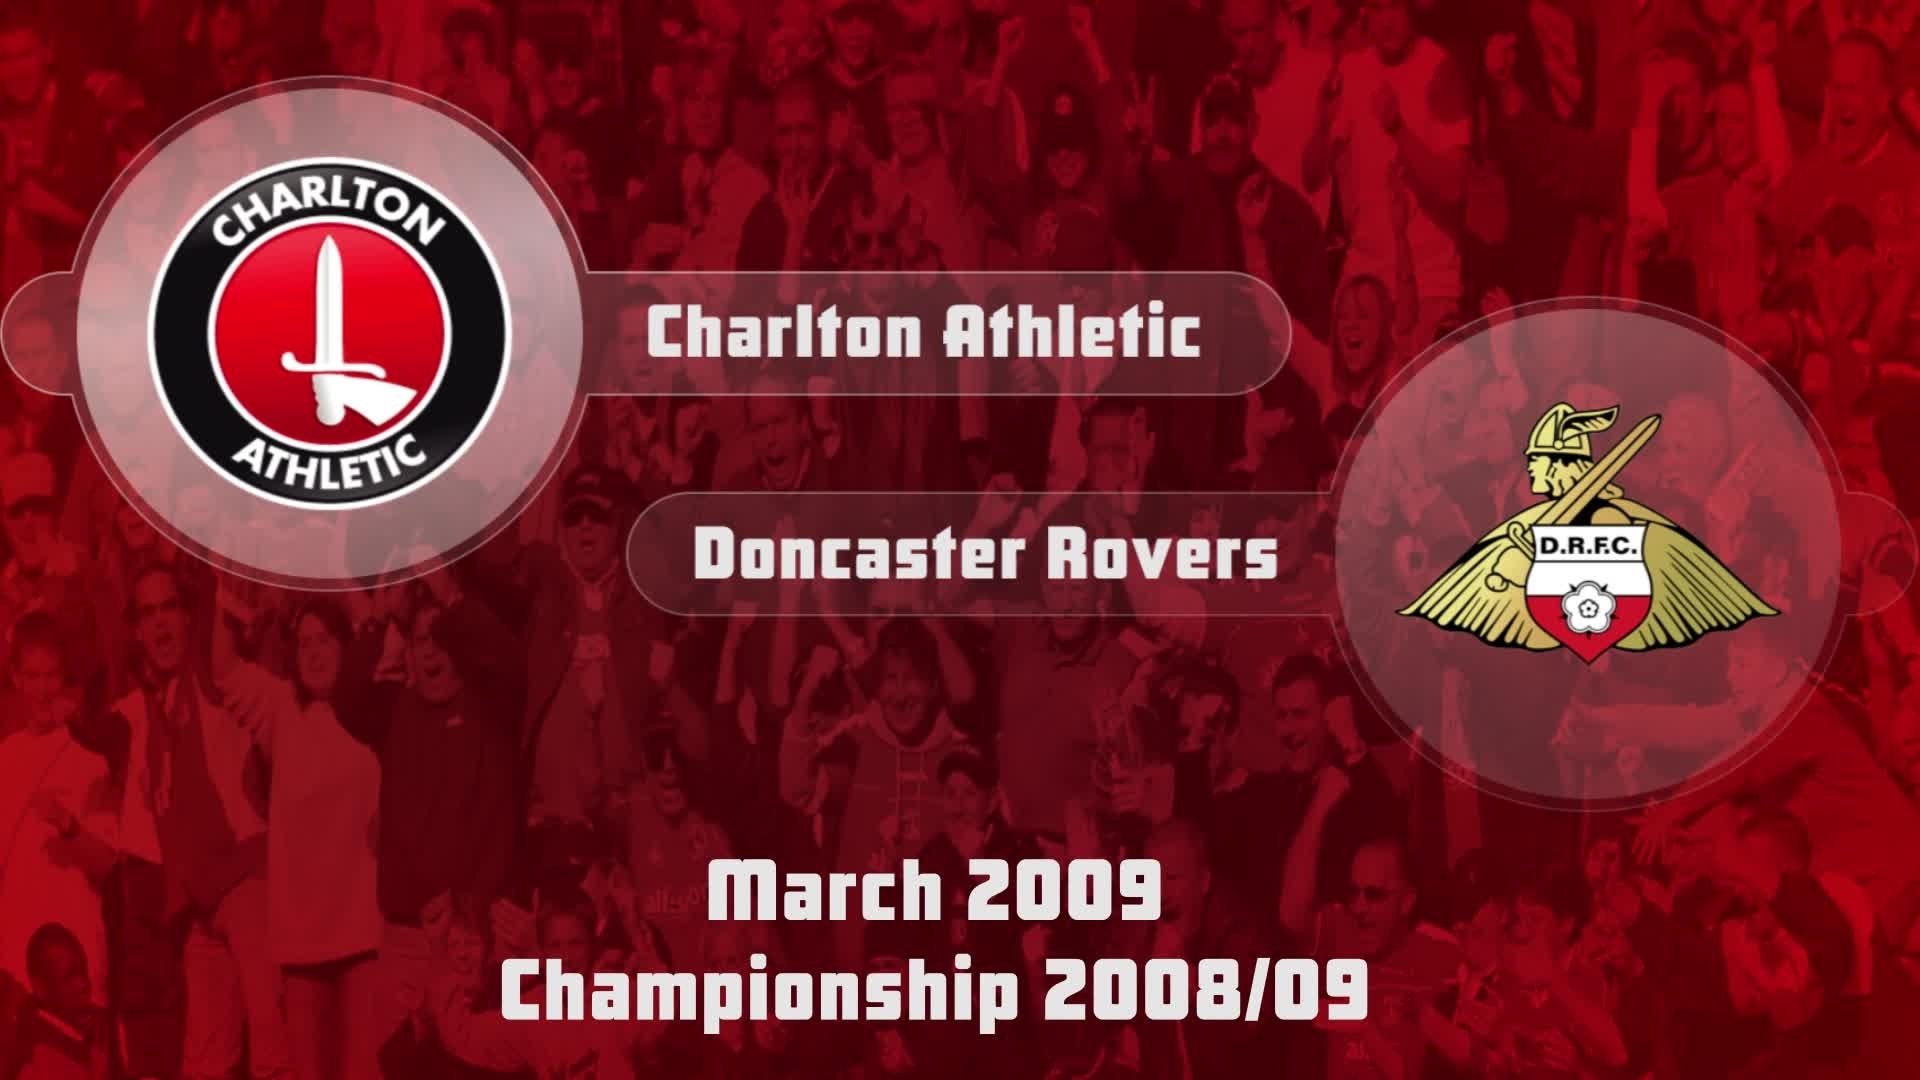 39 HIGHLIGHTS | Charlton 1 Doncaster 2 (March 2009)